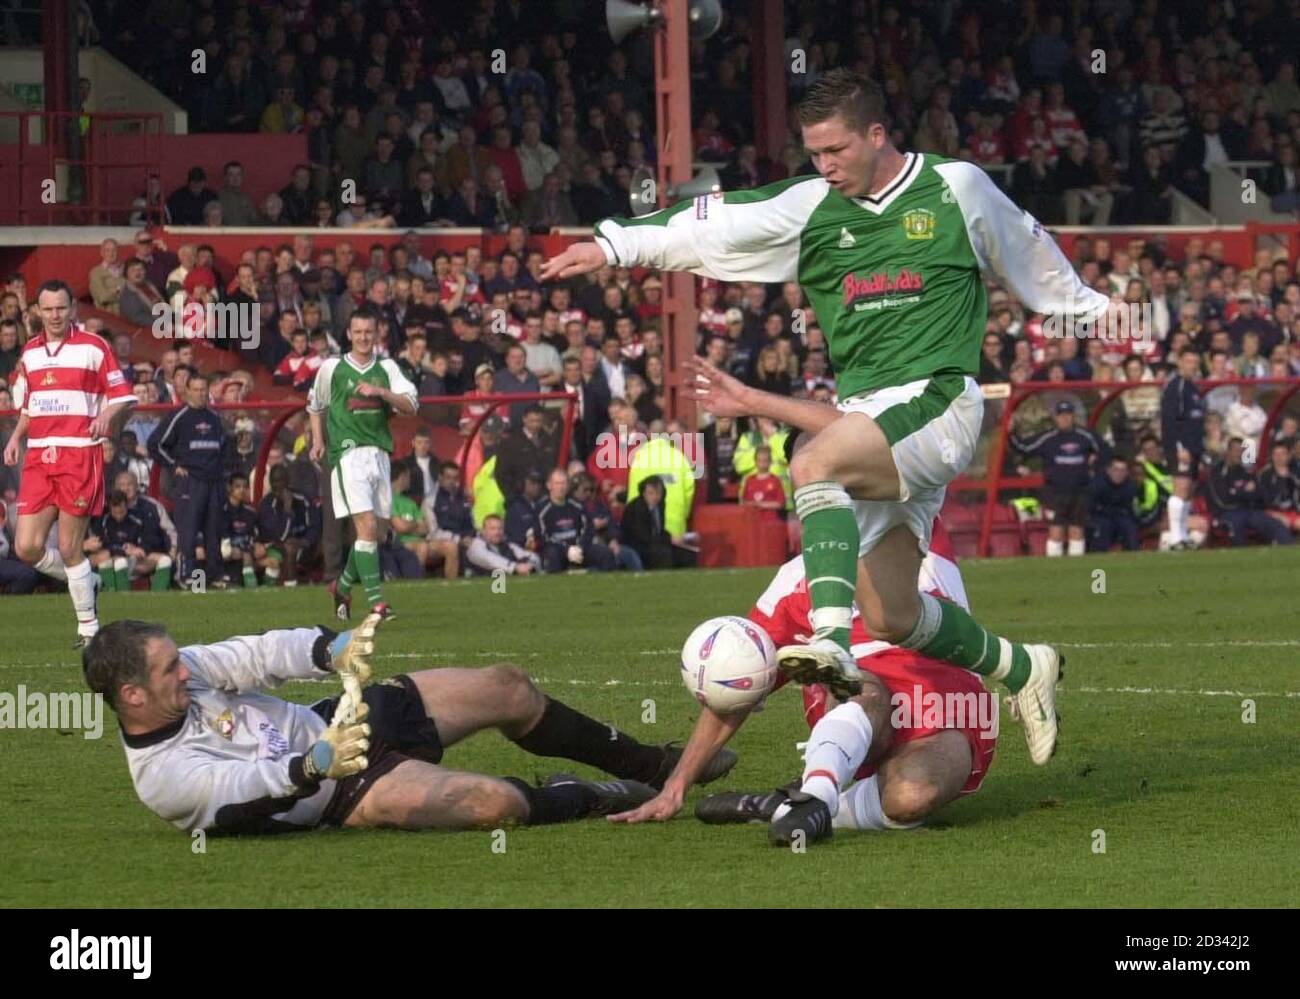 Yeovil Town's Kevin Gall (top) clears the outstretched legs of Doncaster Rovers' Steve Foster as Rovers' 'keeper Andy Warrington (L) slides in the gather the ball during their Nationwide Conference match at Doncaster's Belle Vue ground.  THIS PICTURE CAN ONLY BE USED WITHIN THE CONTEXT OF AN EDITORIAL FEATURE. NO UNOFFICIAL CLUB WEBSITE USE. Stock Photo